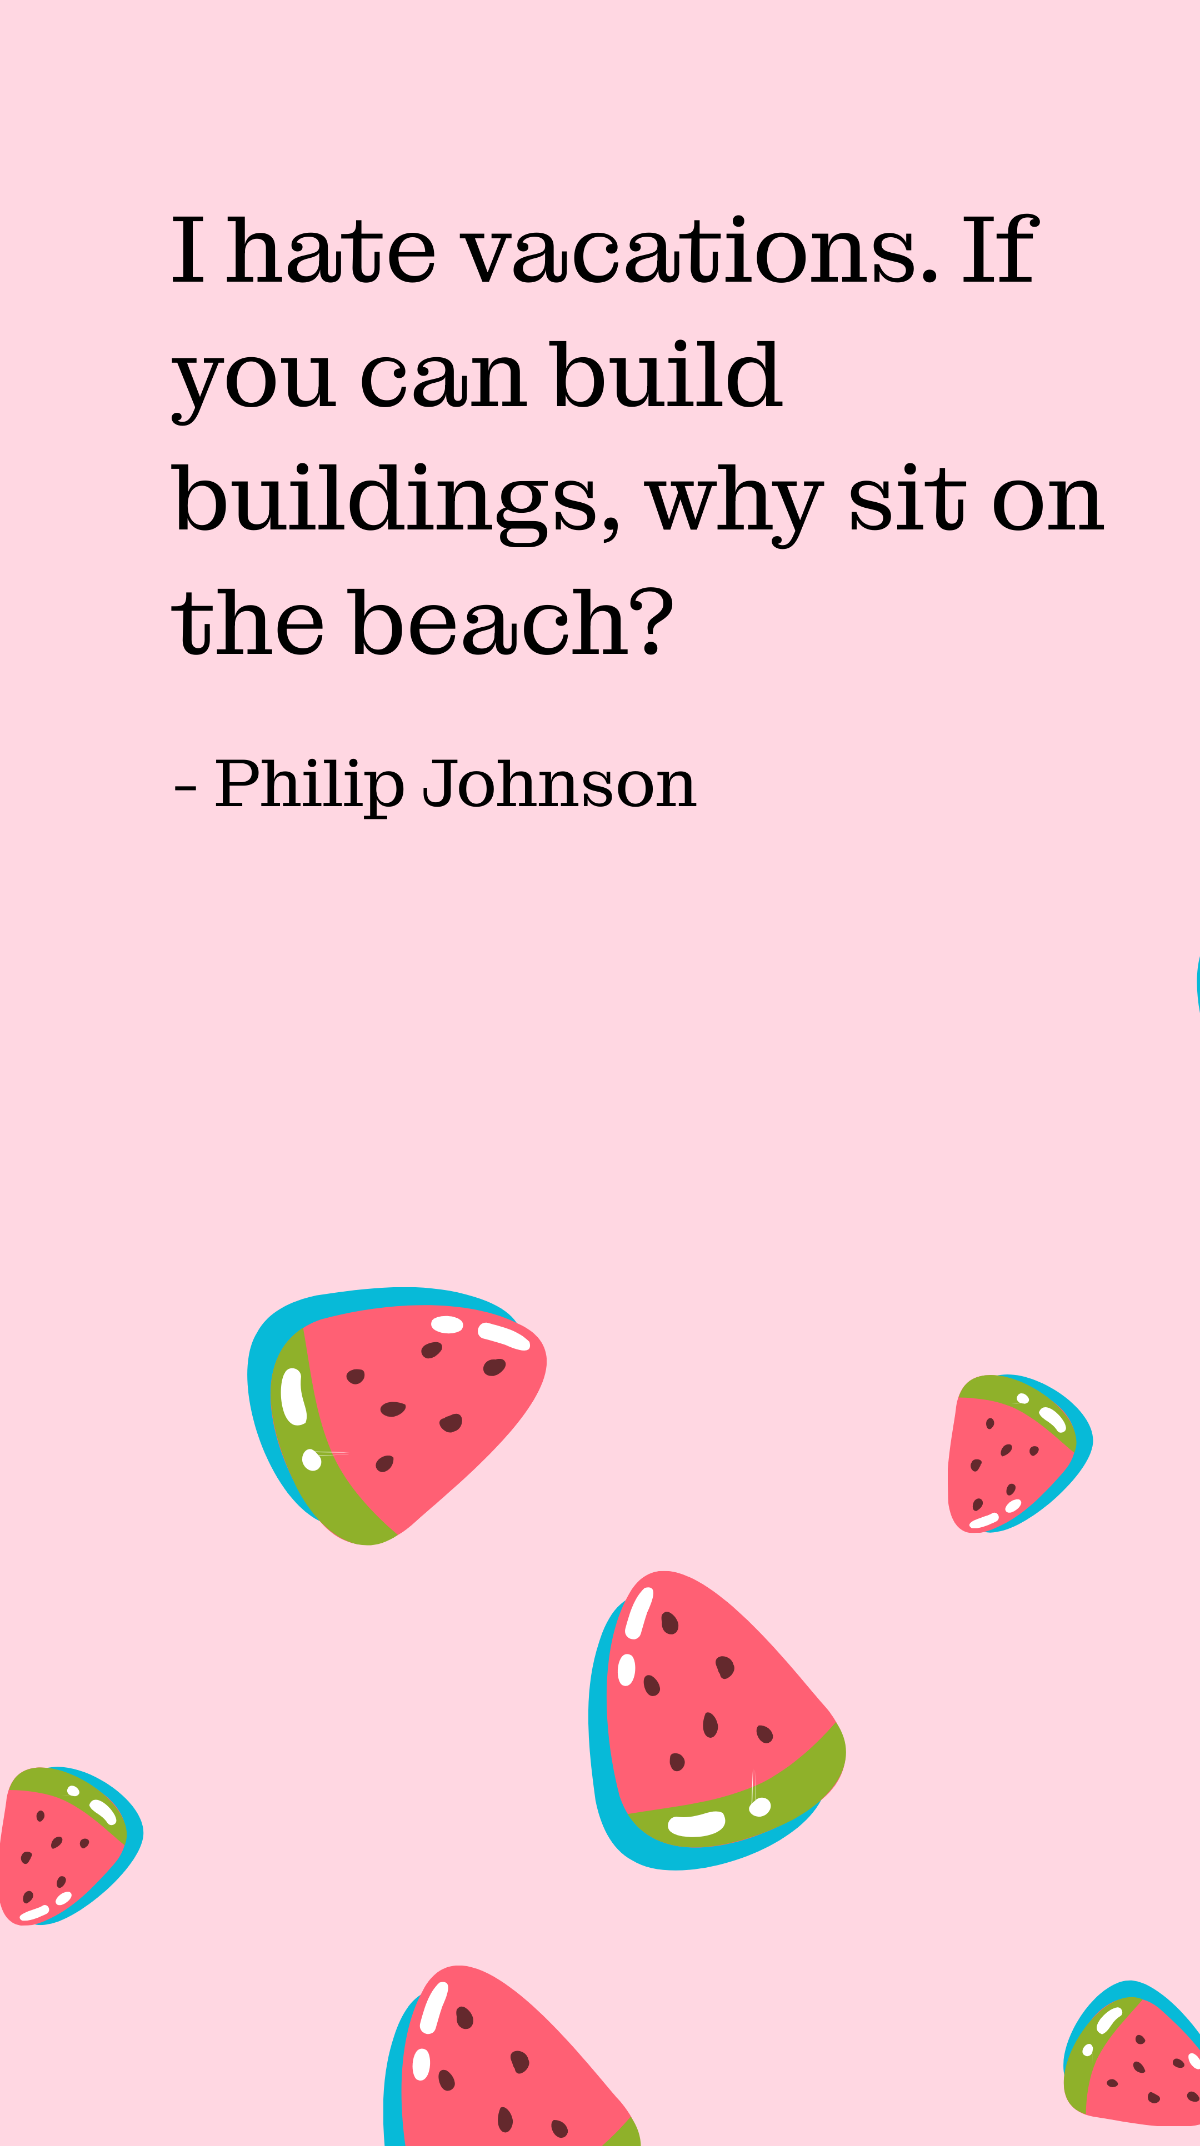 Free Philip Johnson - I hate vacations. If you can build buildings, why sit on the beach? Template